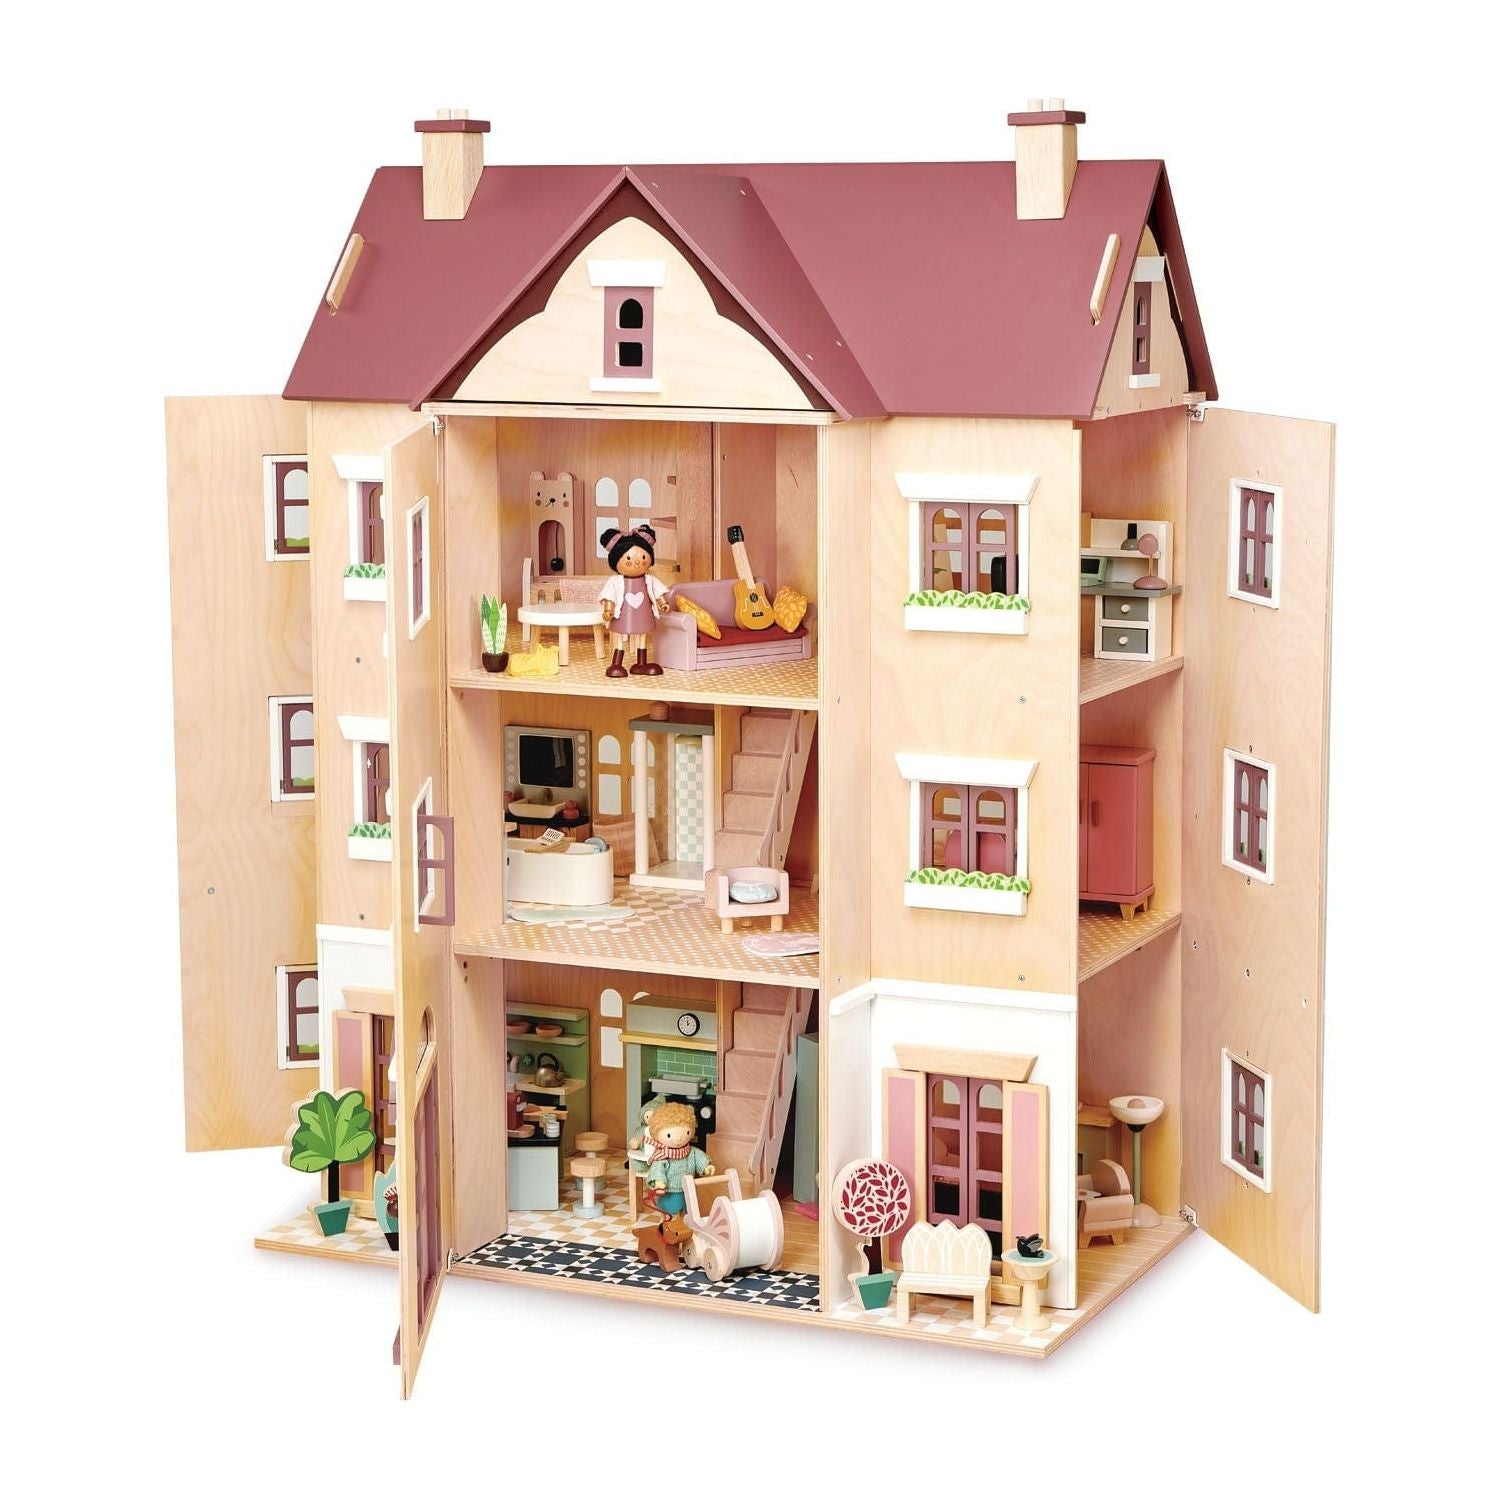 Tender Leaf Fantail Hall Deluxe Wooden Dolls House opened